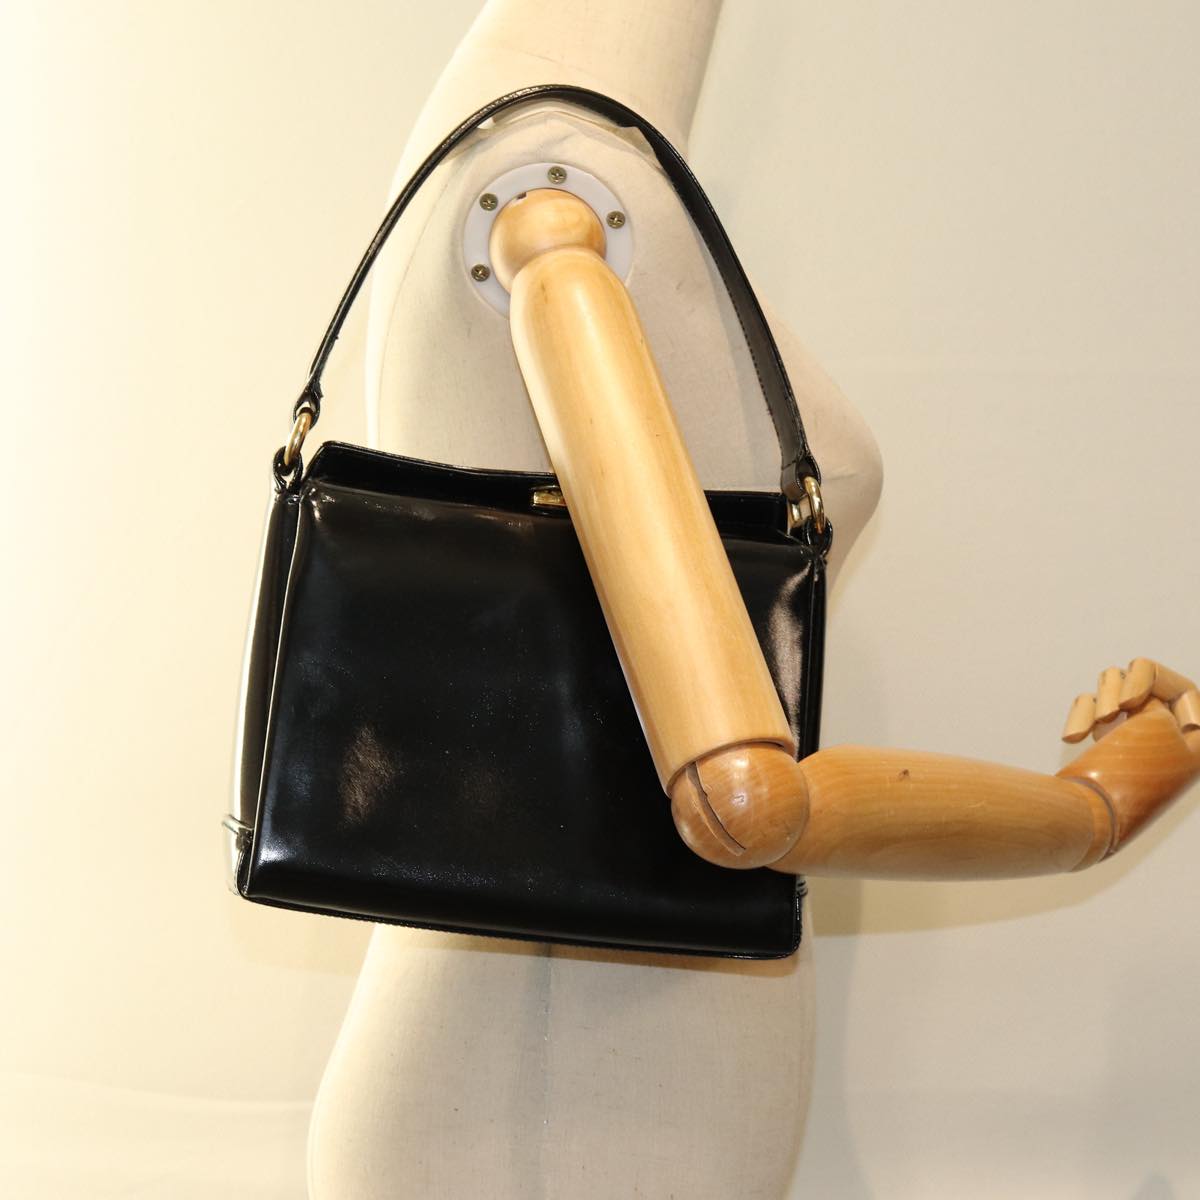 GUCCI Hand Bag Patent leather Black 000 110 0907 Auth 74593